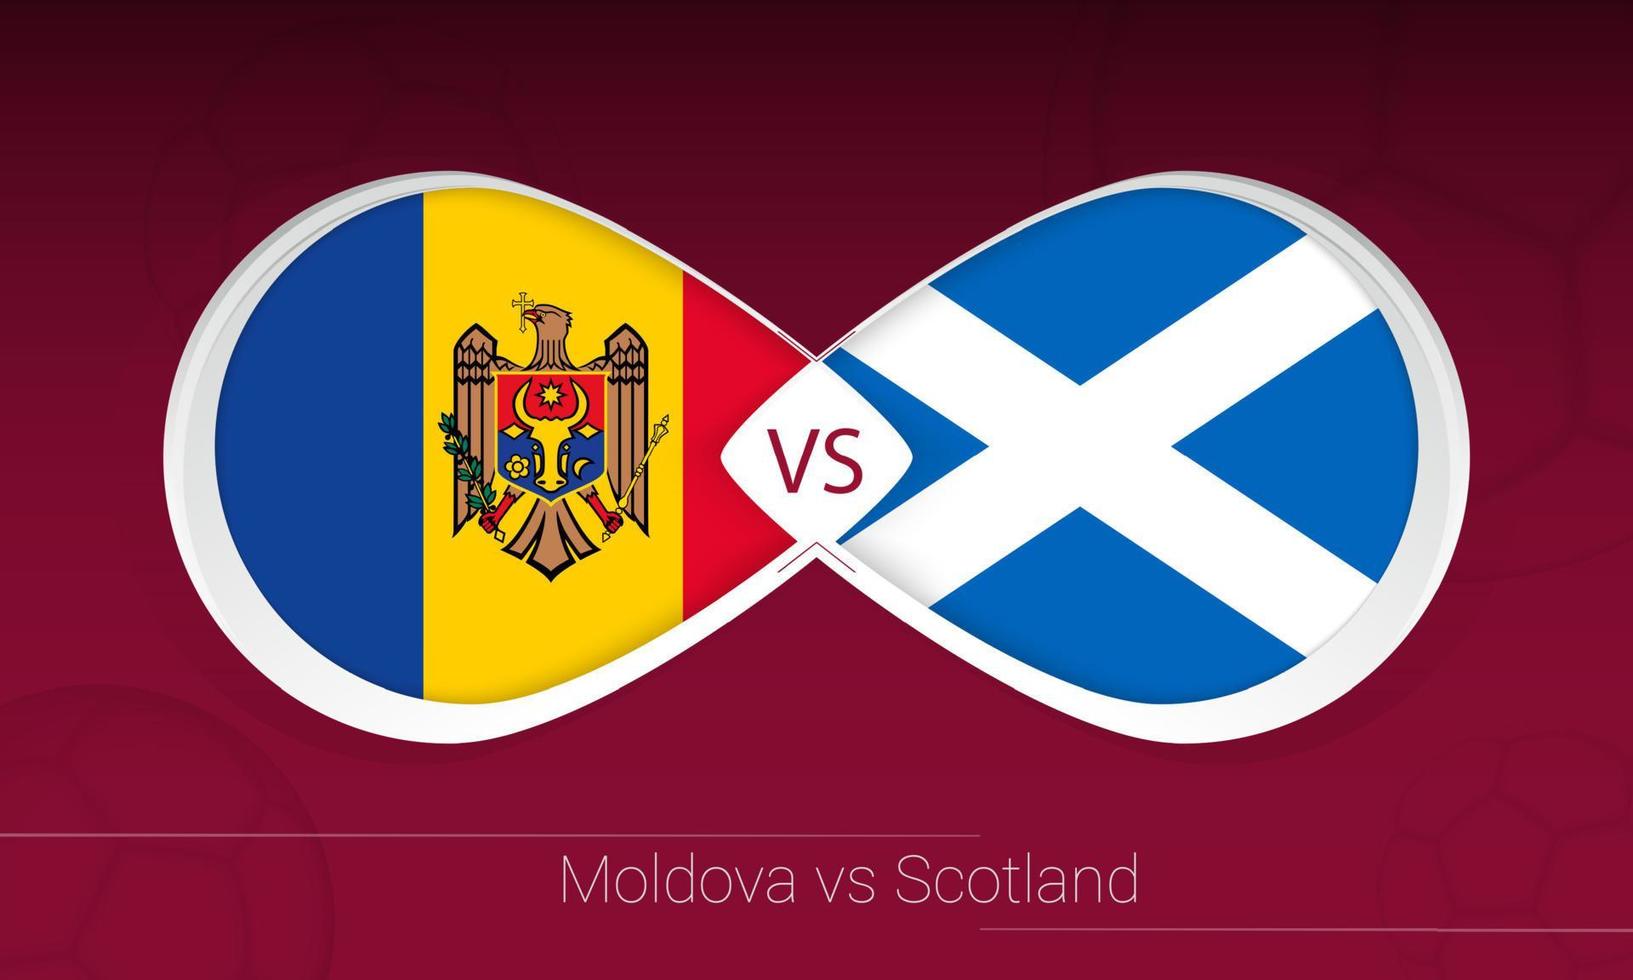 Moldova vs Scotland in Football Competition, Group F. Versus icon on Football background. vector